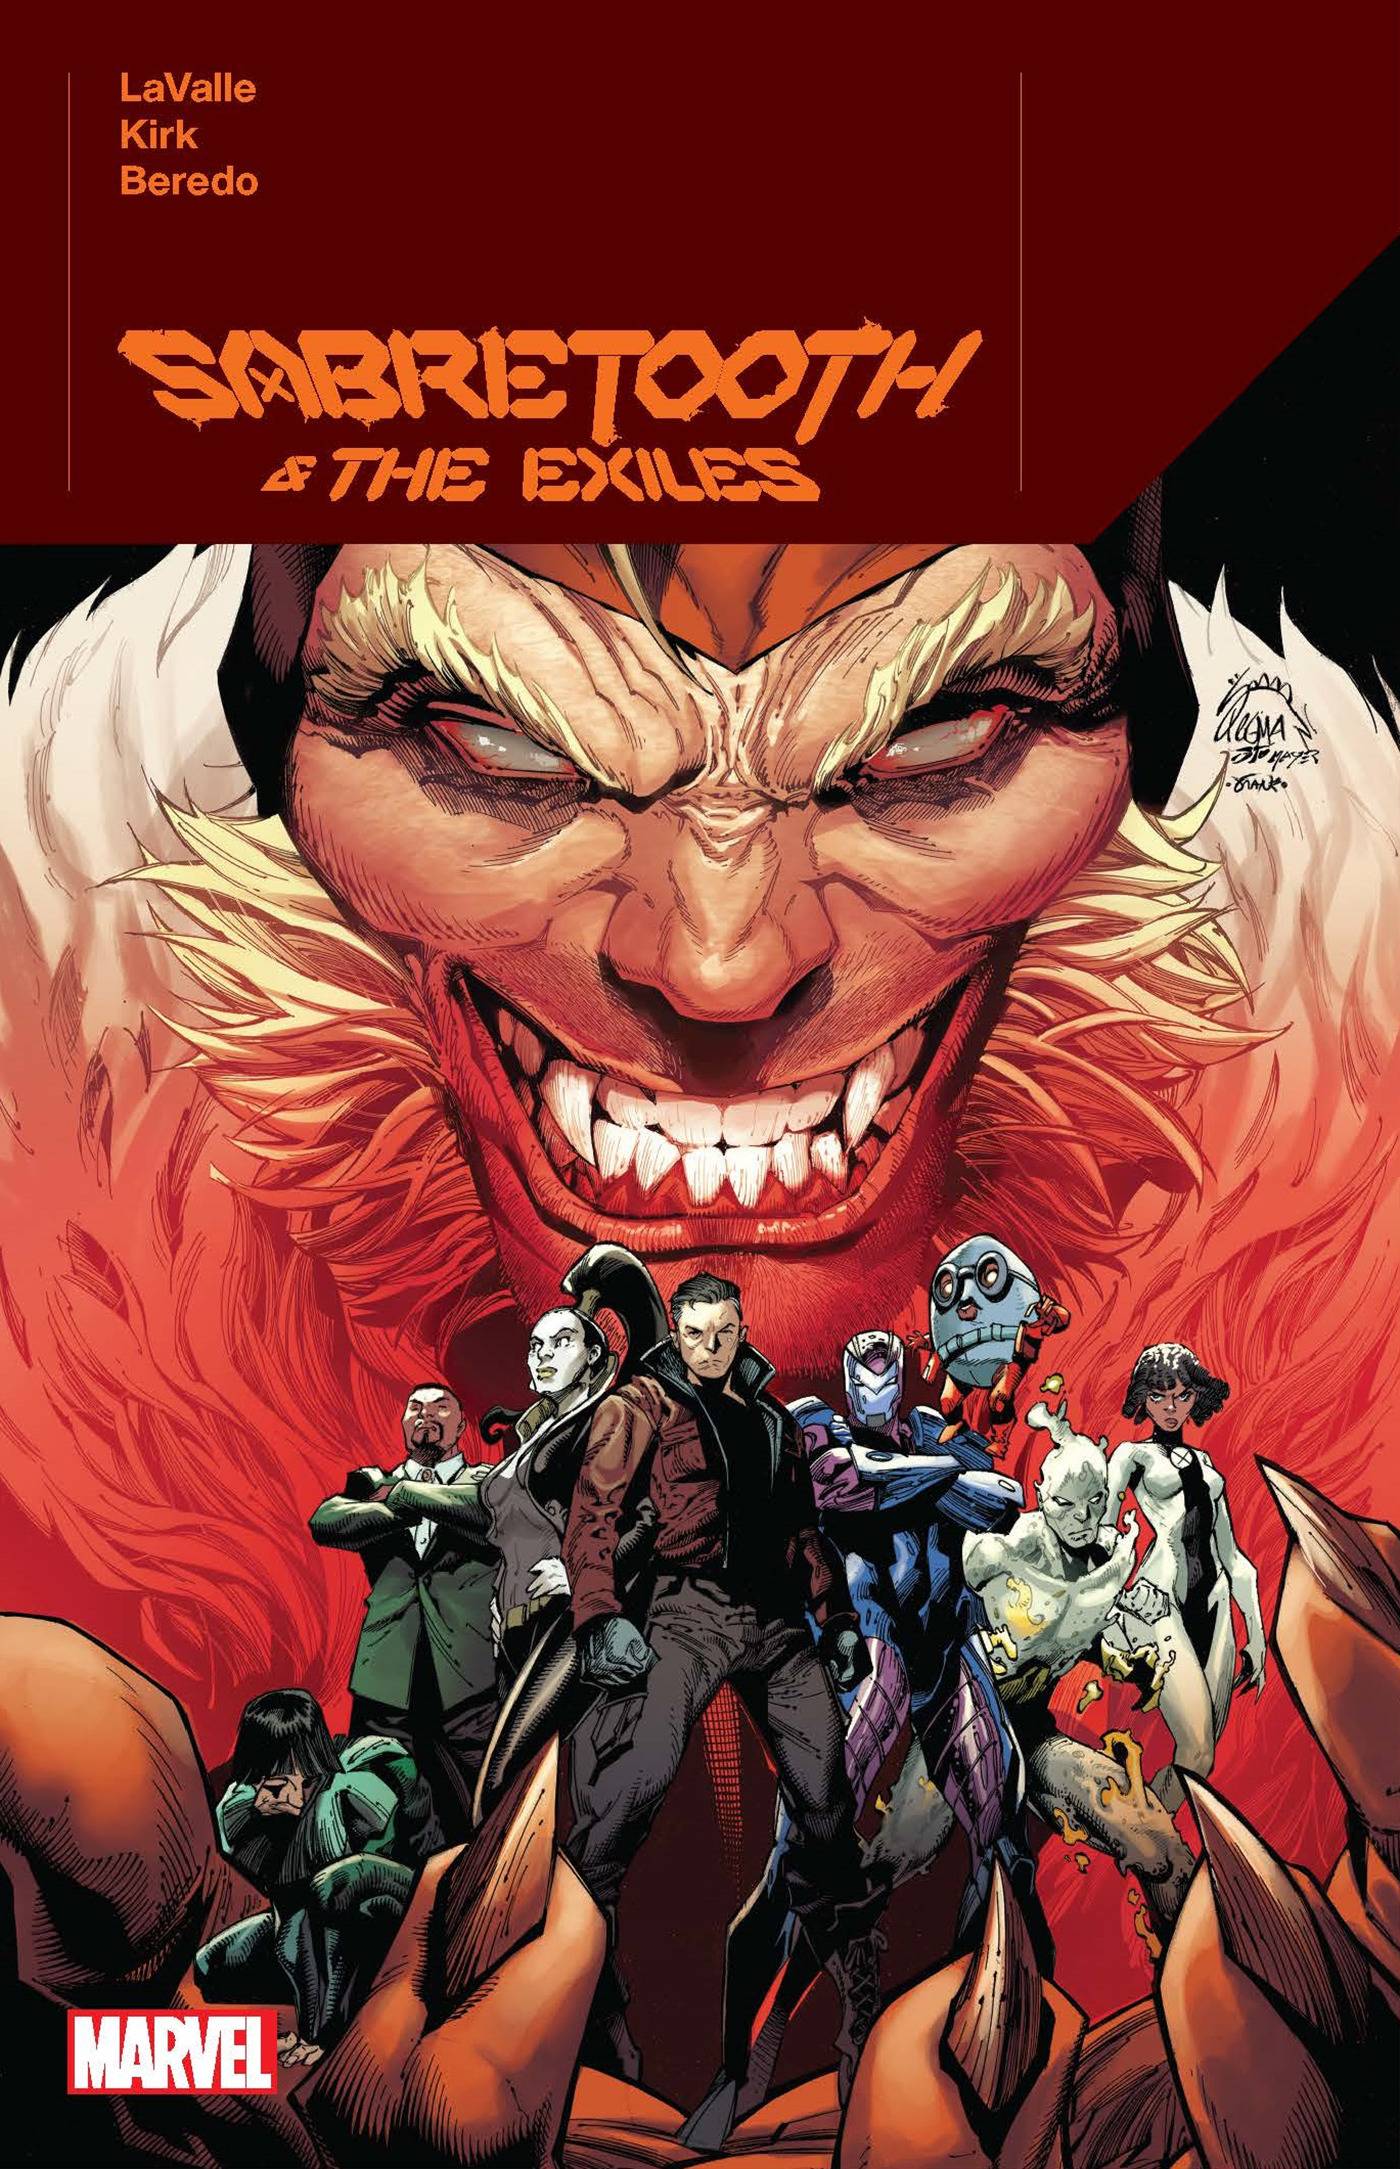 SABRETOOTH AND THE EXILES TP